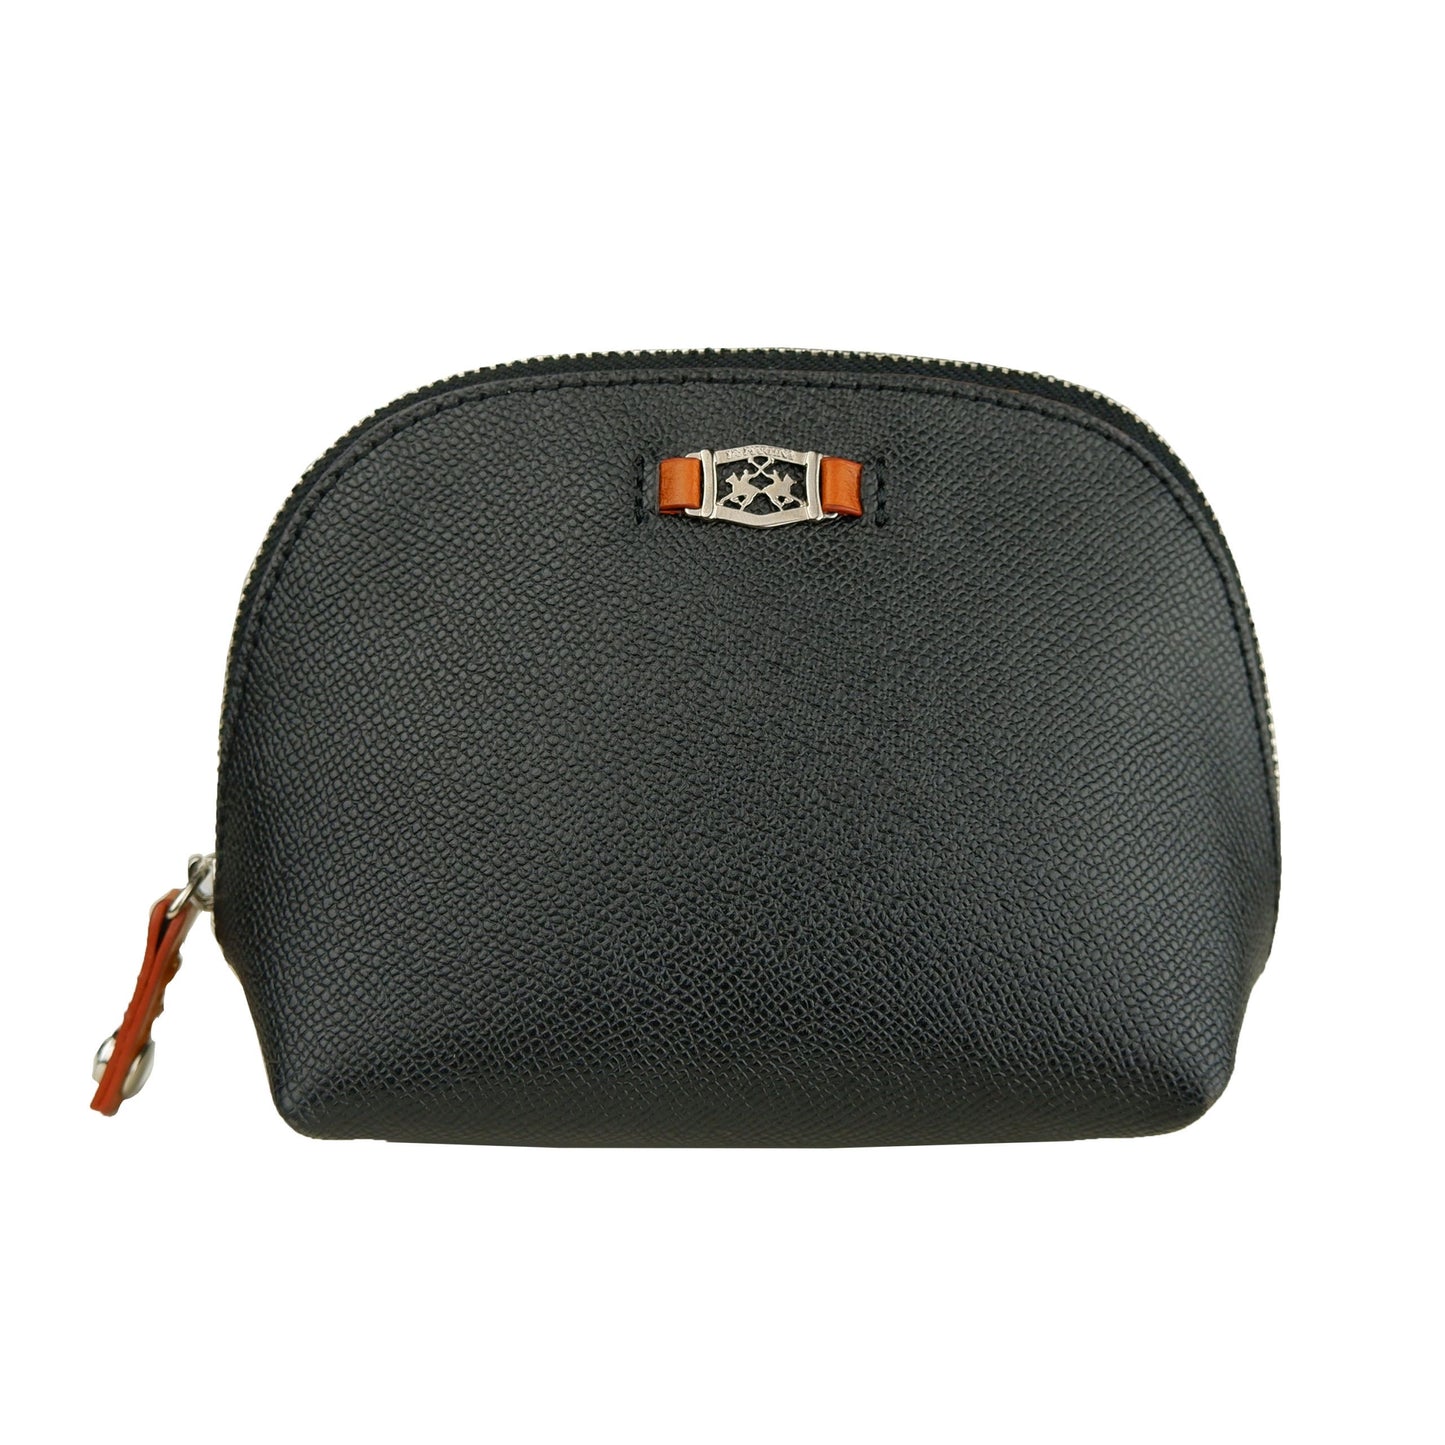 Chic Black Leather Cosmetics Pouch